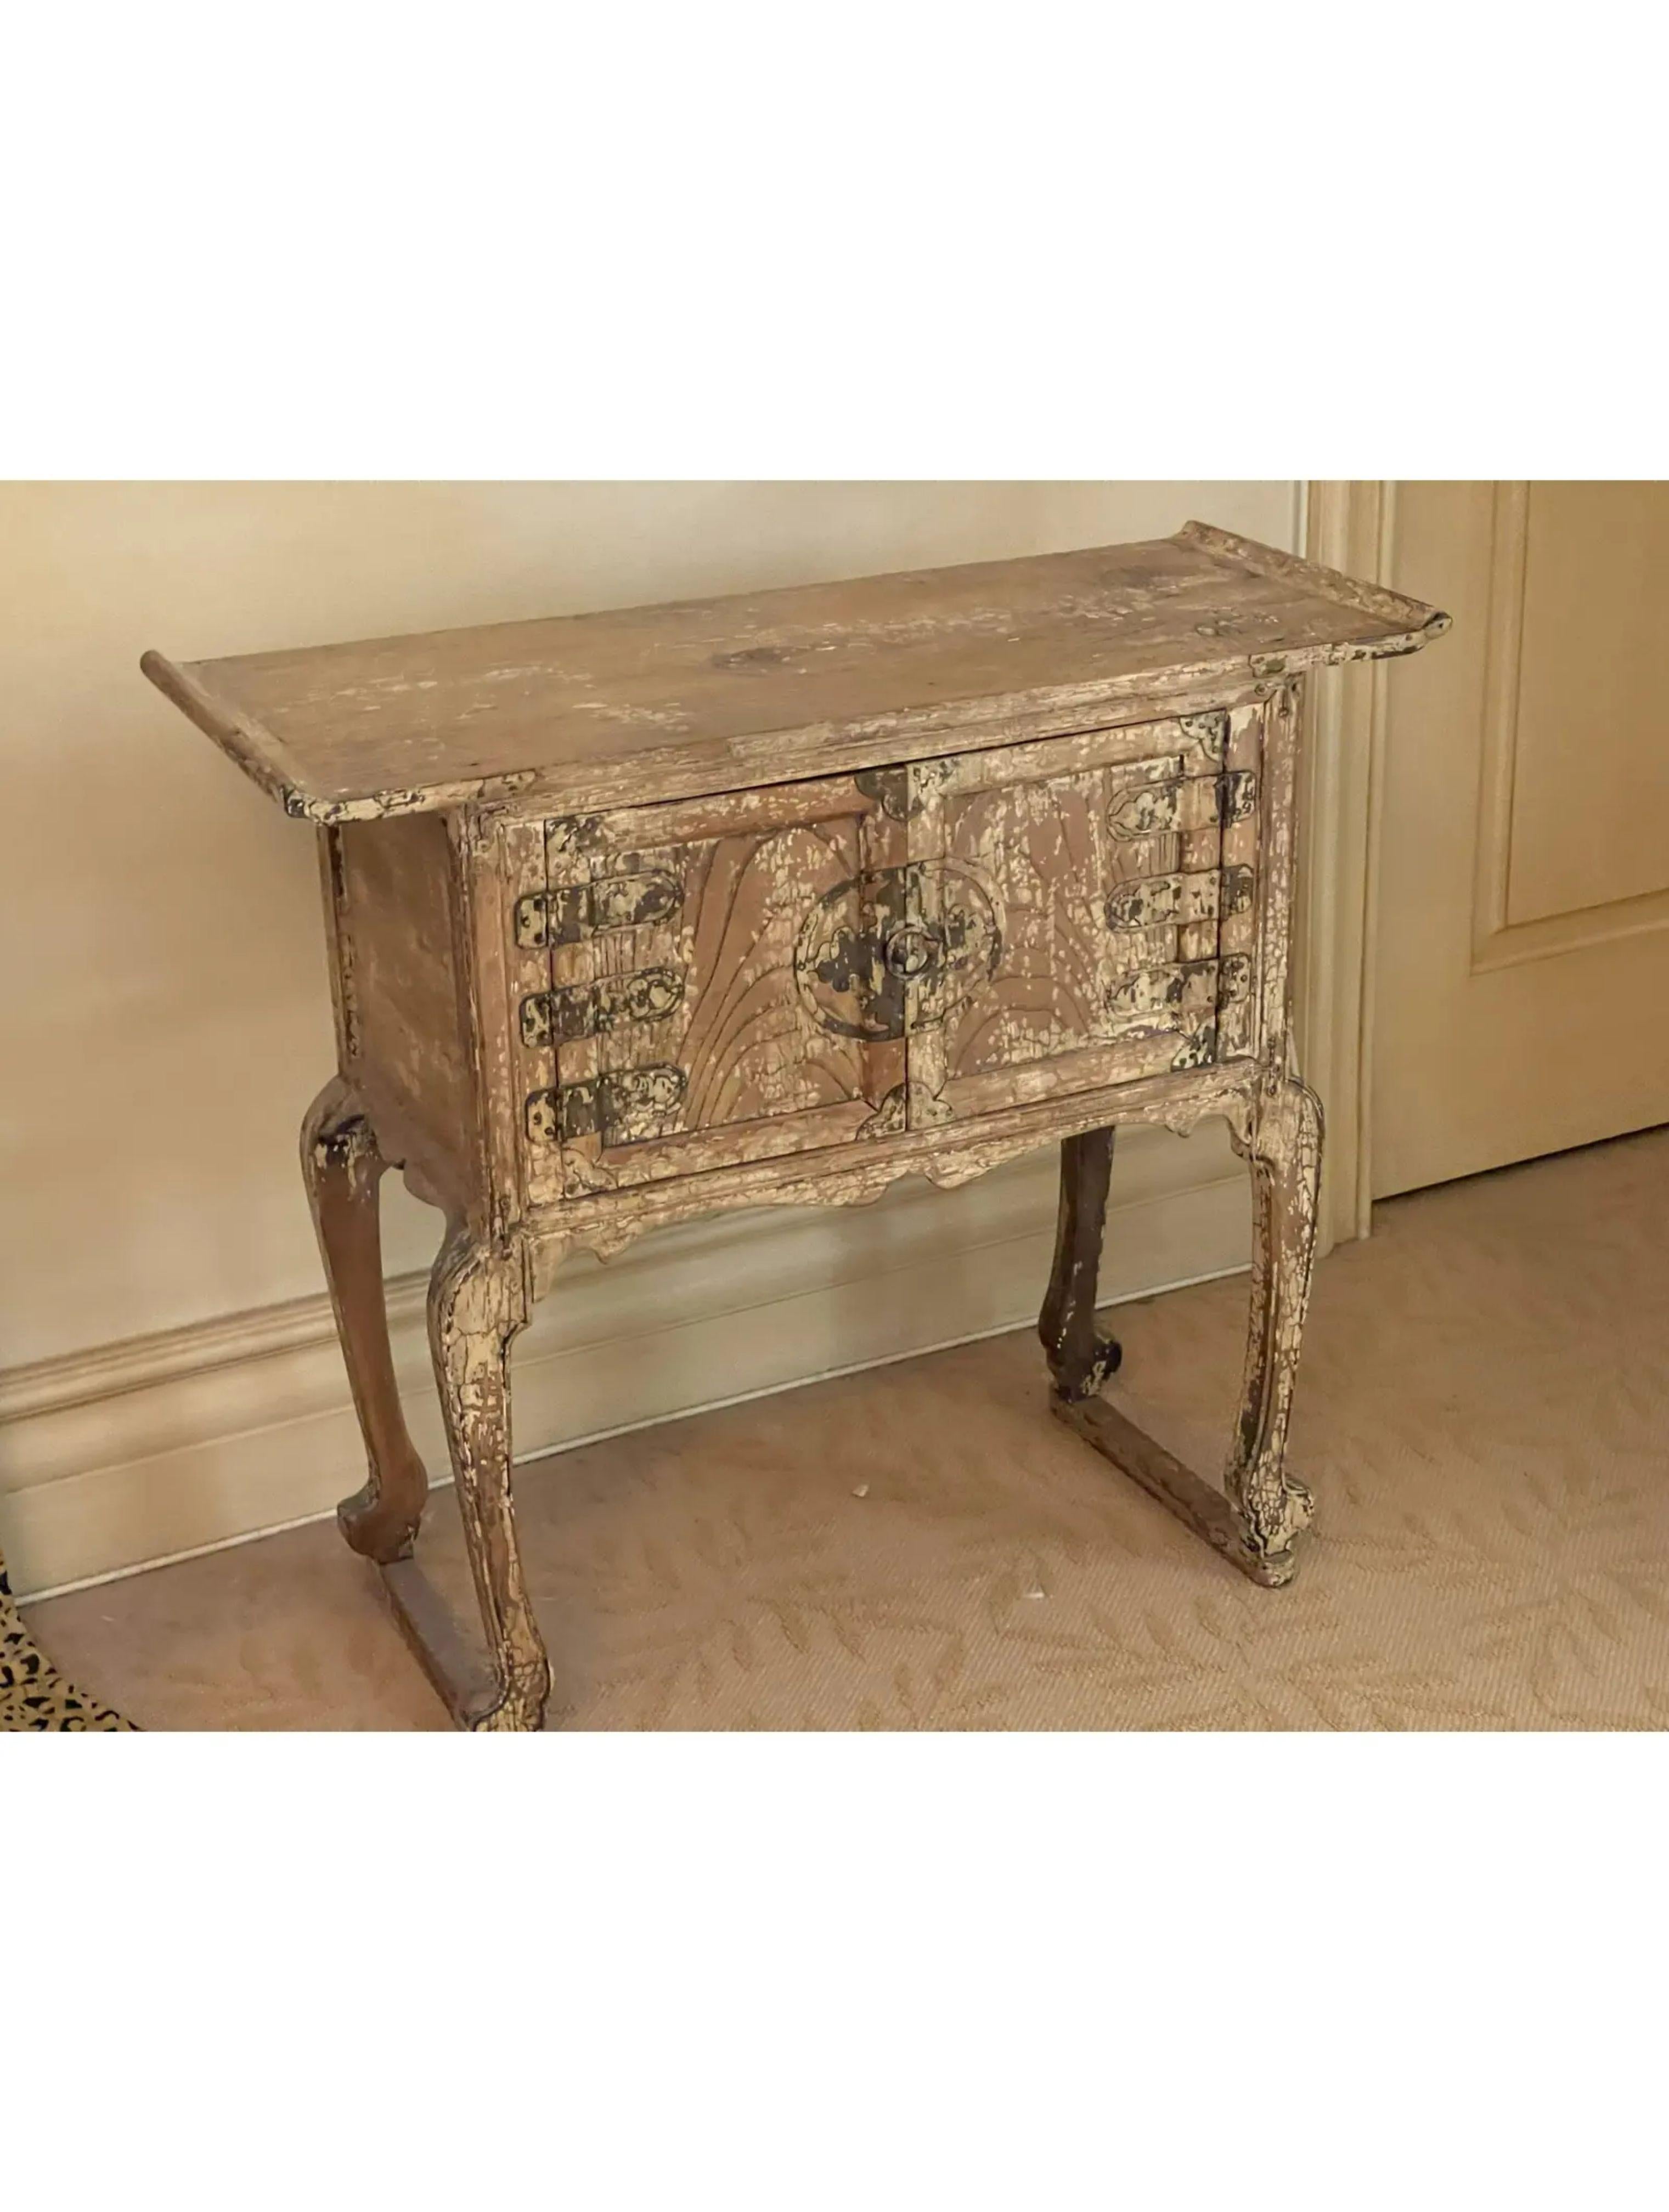 Wood Antique Chinese Ming Style Side Table with Crackle Finish